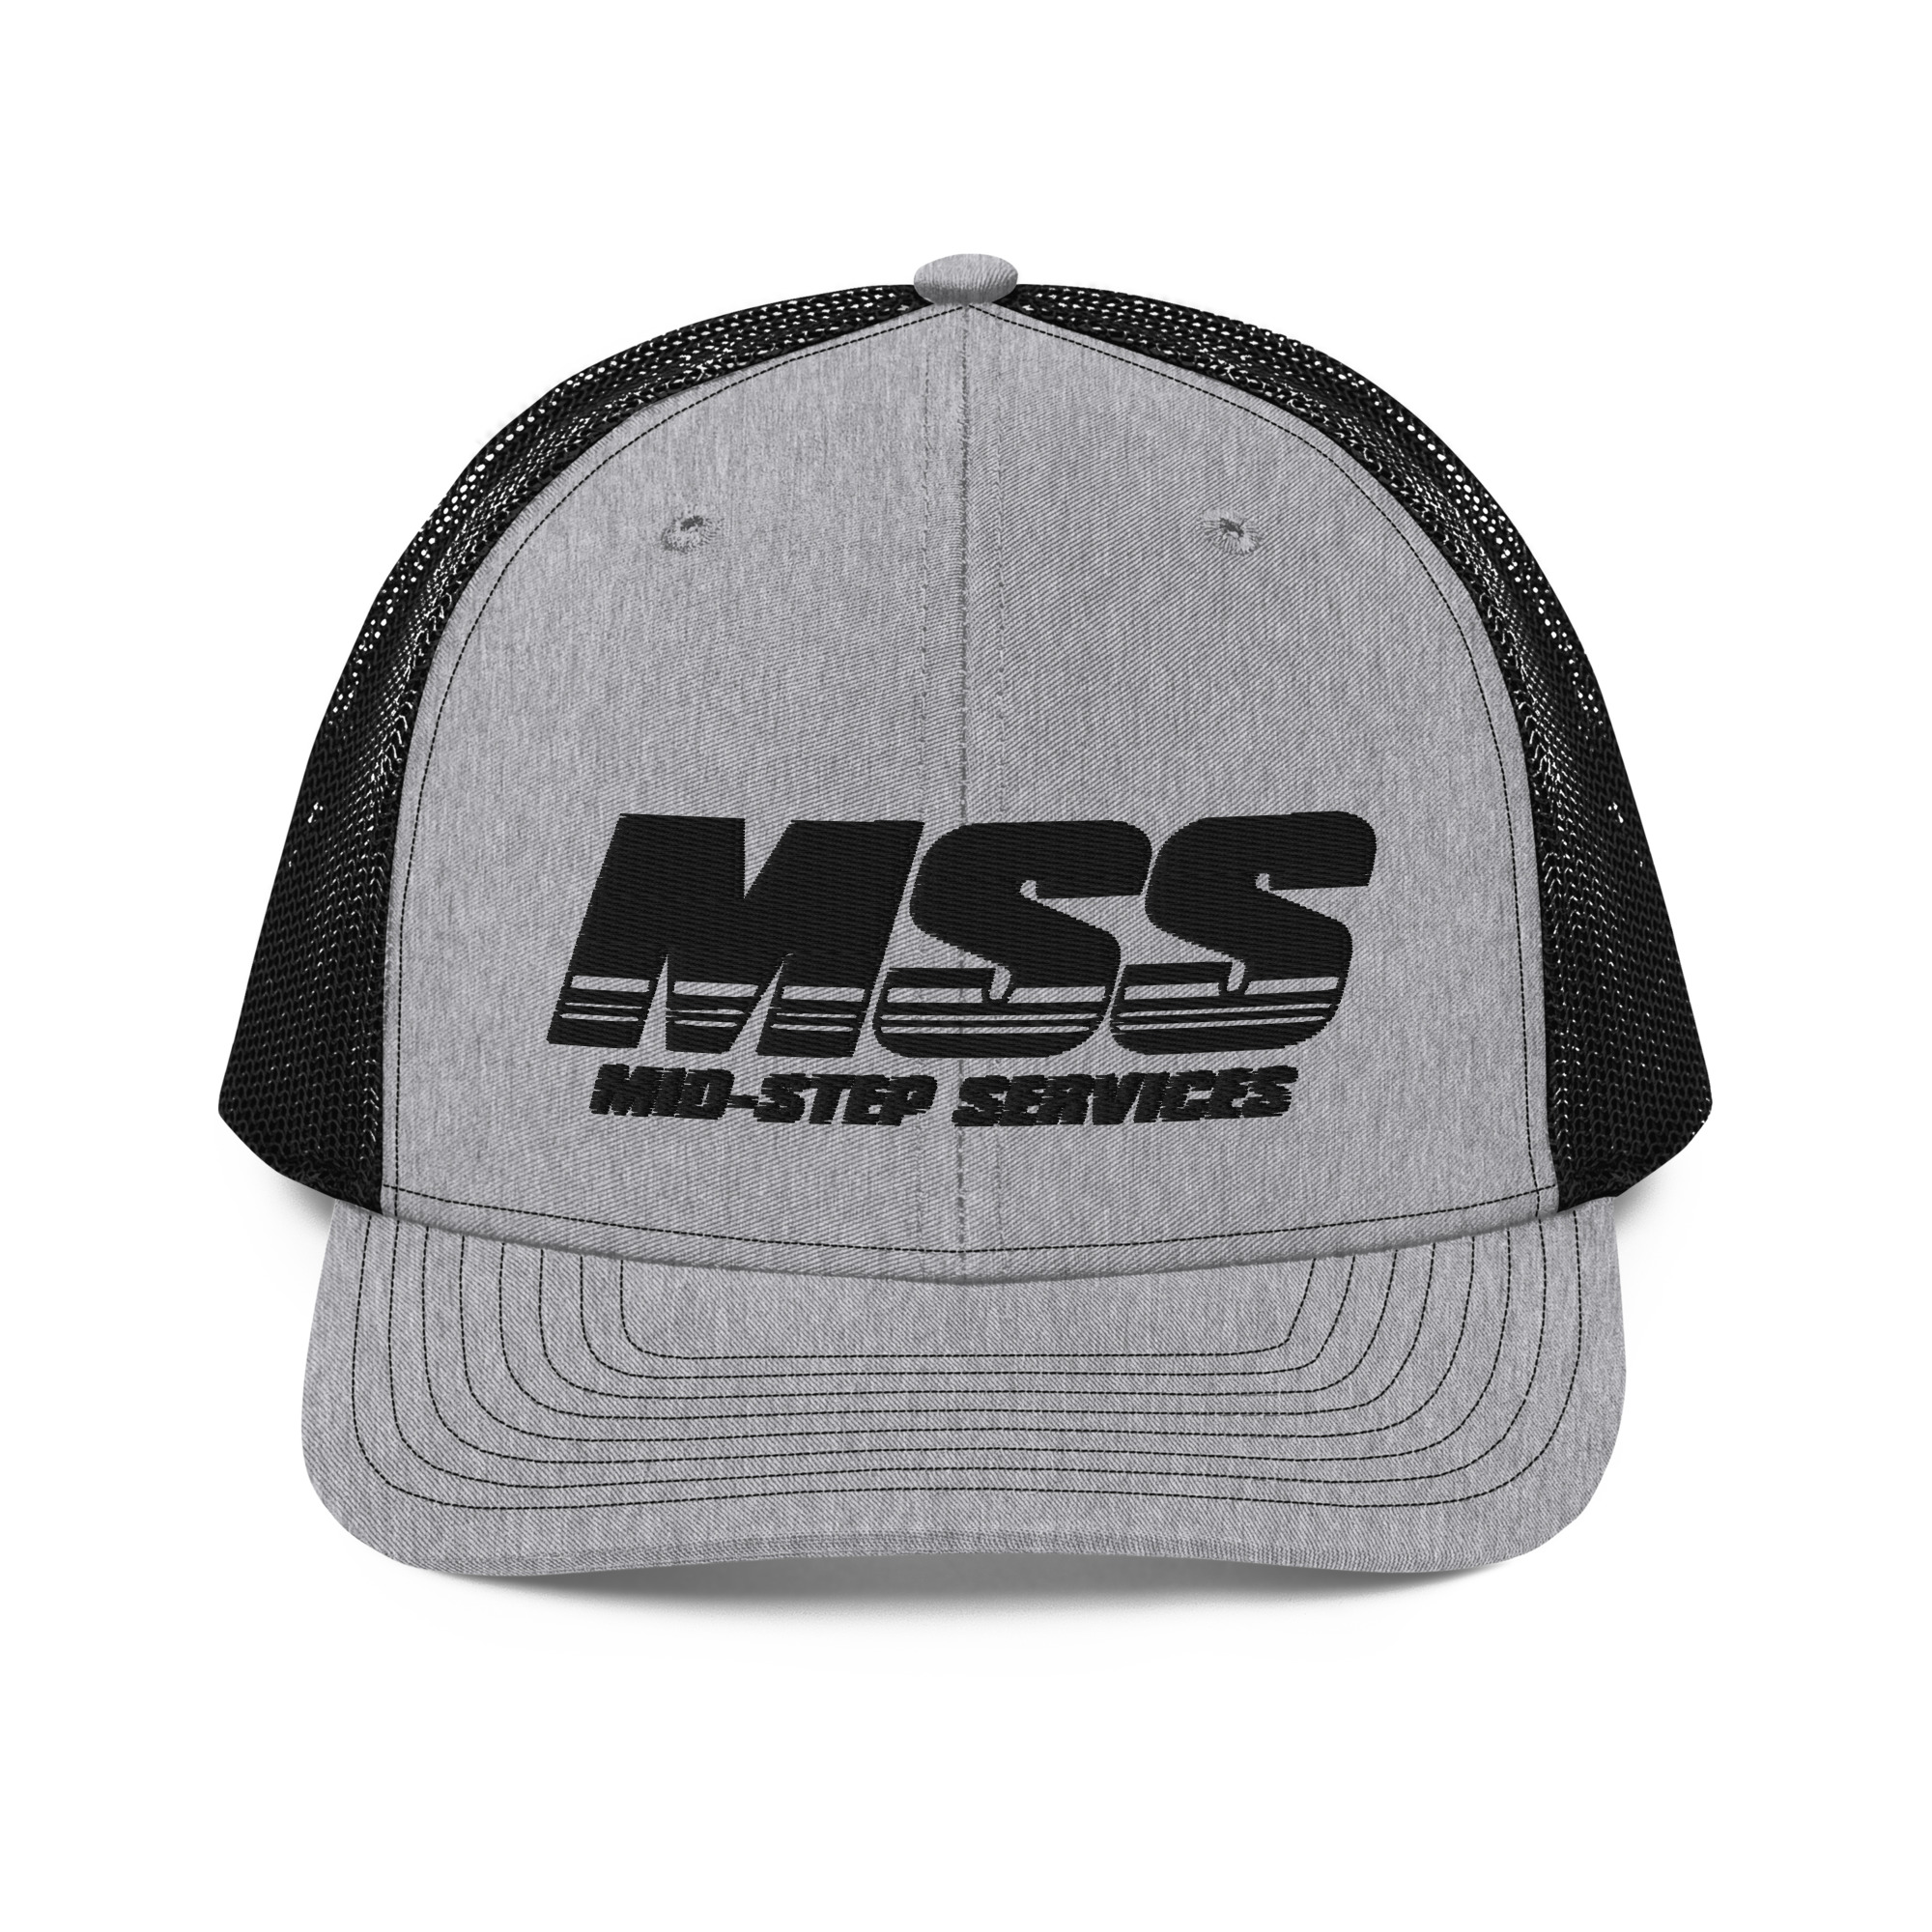 Services – Mesh Midstep Hat MSS